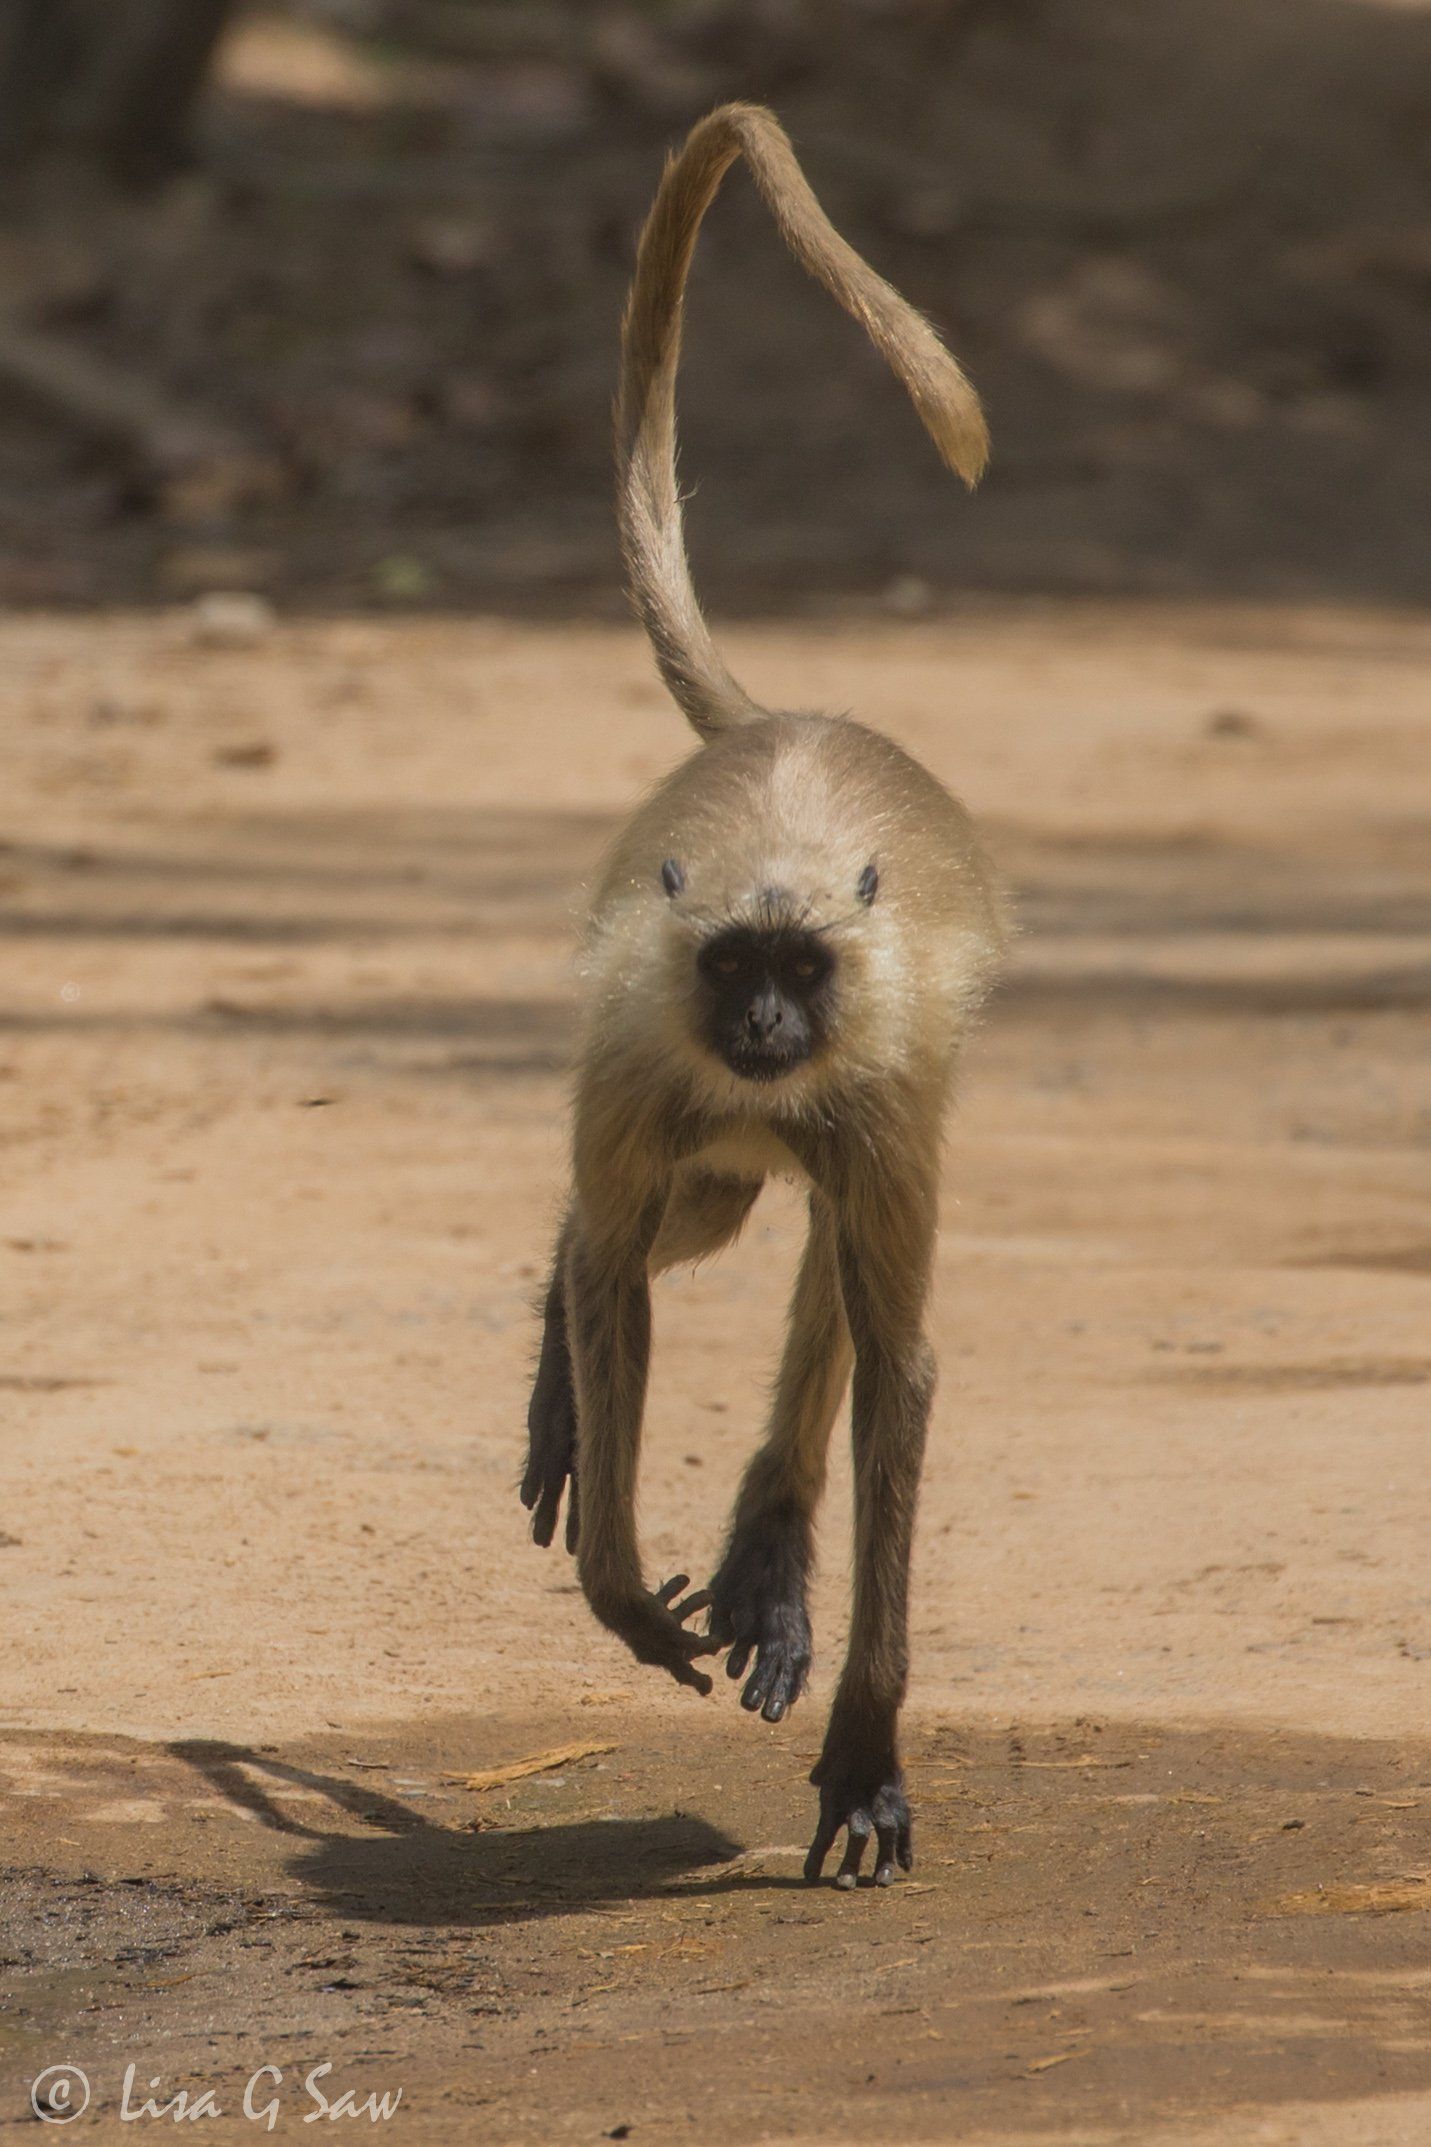 Langur running along track with tail up